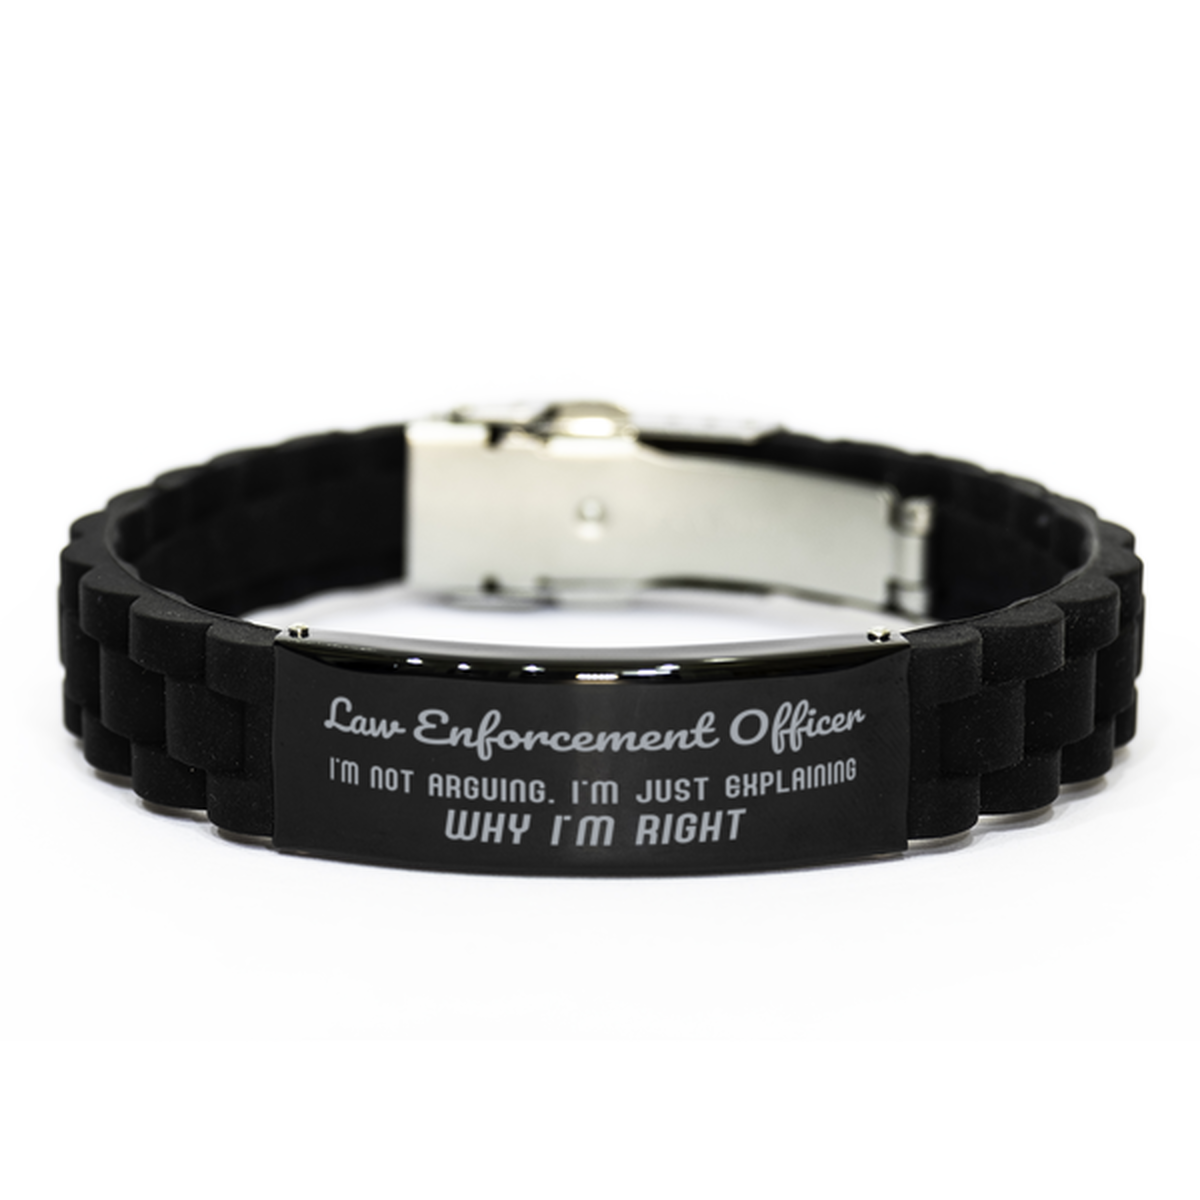 Law Enforcement Officer I'm not Arguing. I'm Just Explaining Why I'm RIGHT Black Glidelock Clasp Bracelet, Funny Saying Quote Law Enforcement Officer Gifts For Law Enforcement Officer Graduation Birthday Christmas Gifts for Men Women Coworker